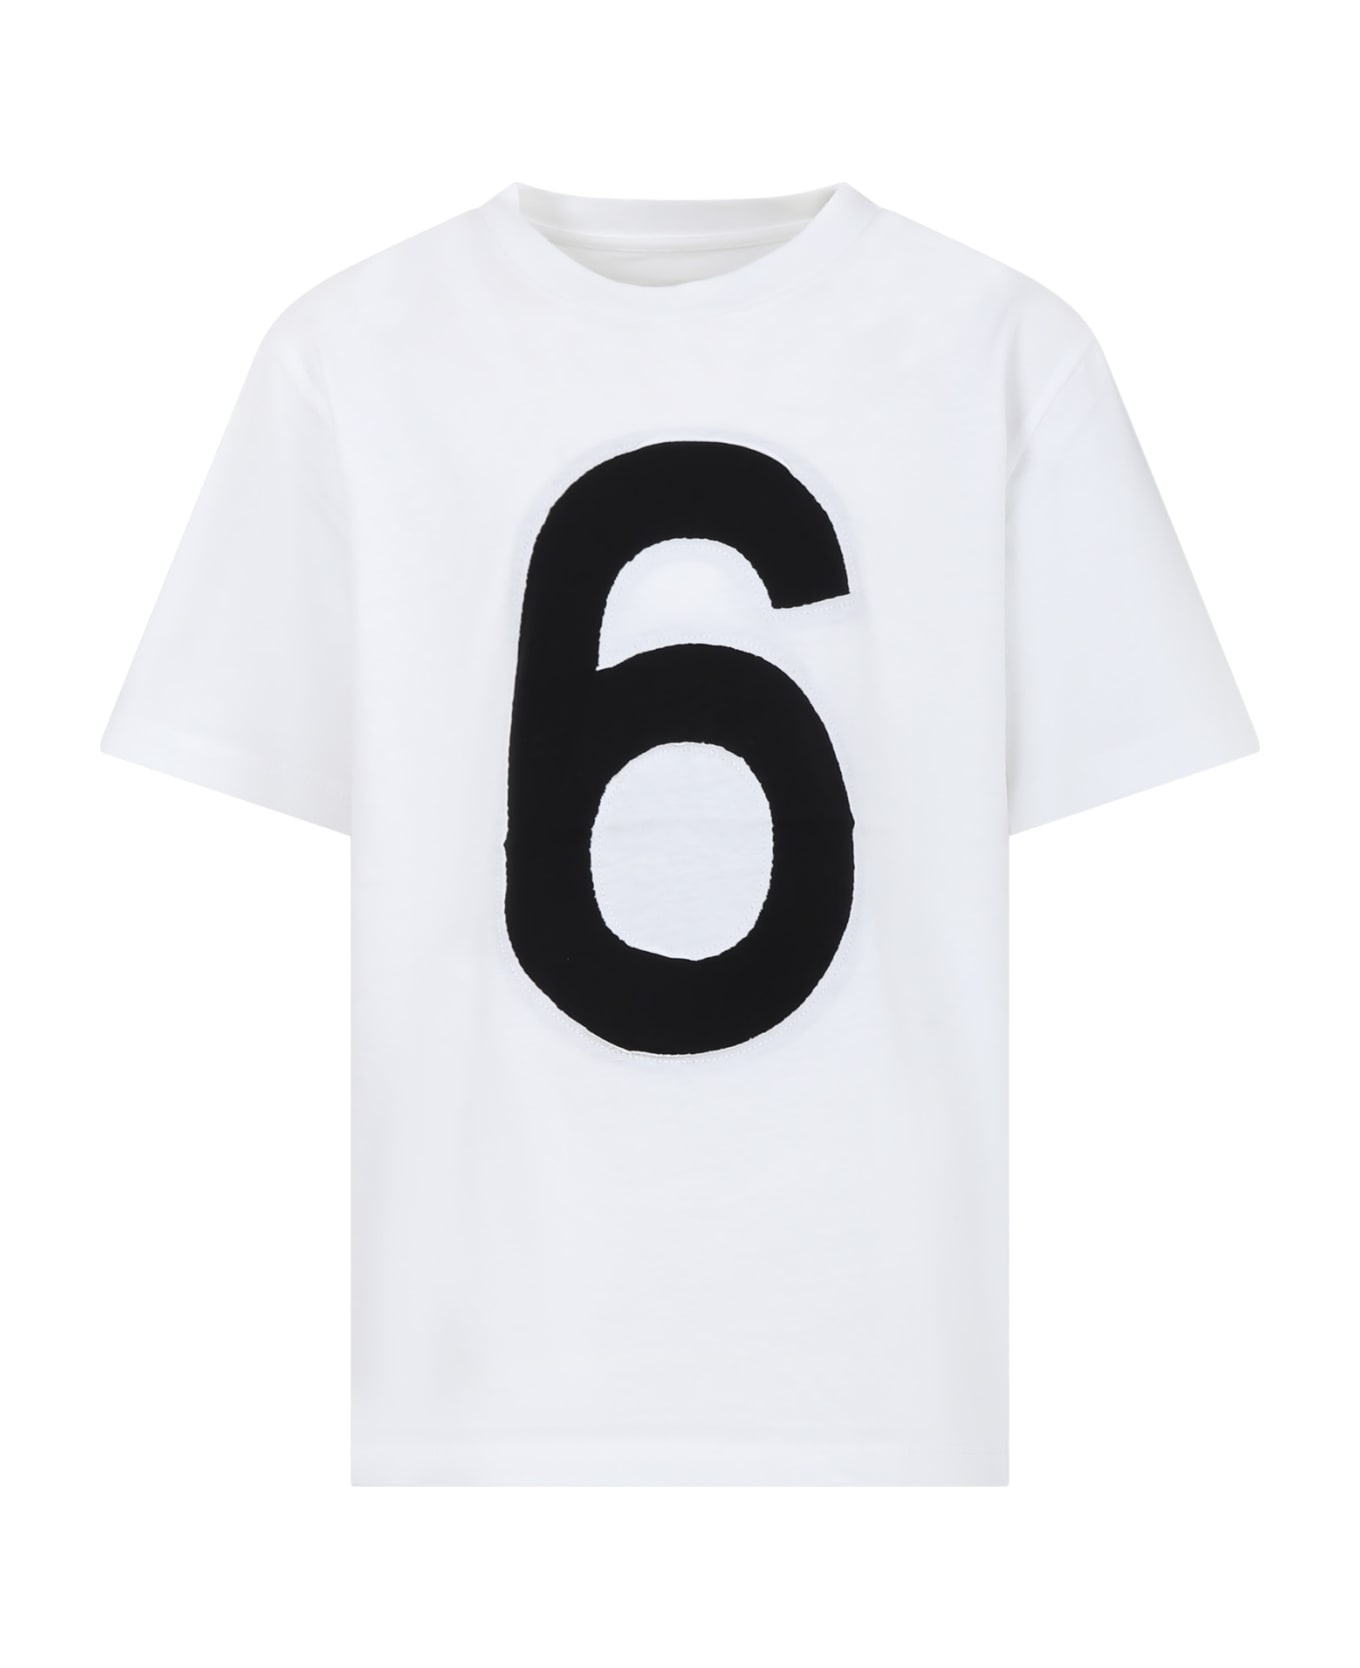 MM6 Maison Margiela White T-shirt For Kids With Number 6 - White